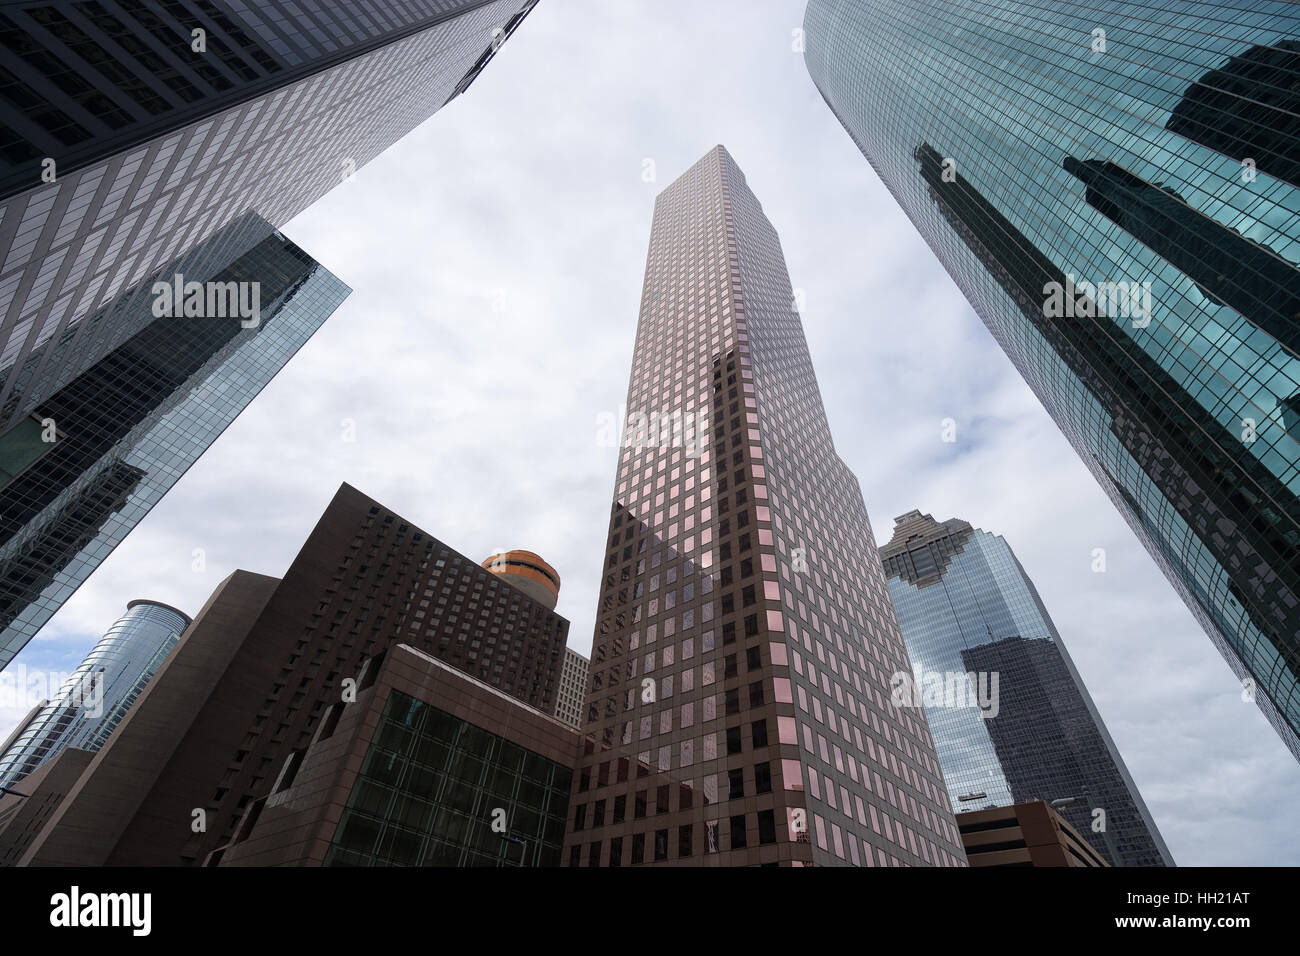 December 29, 2015 Houston, Texas: modern steel and glass high-rise buildings against the cloudy sky in the financial district Stock Photo